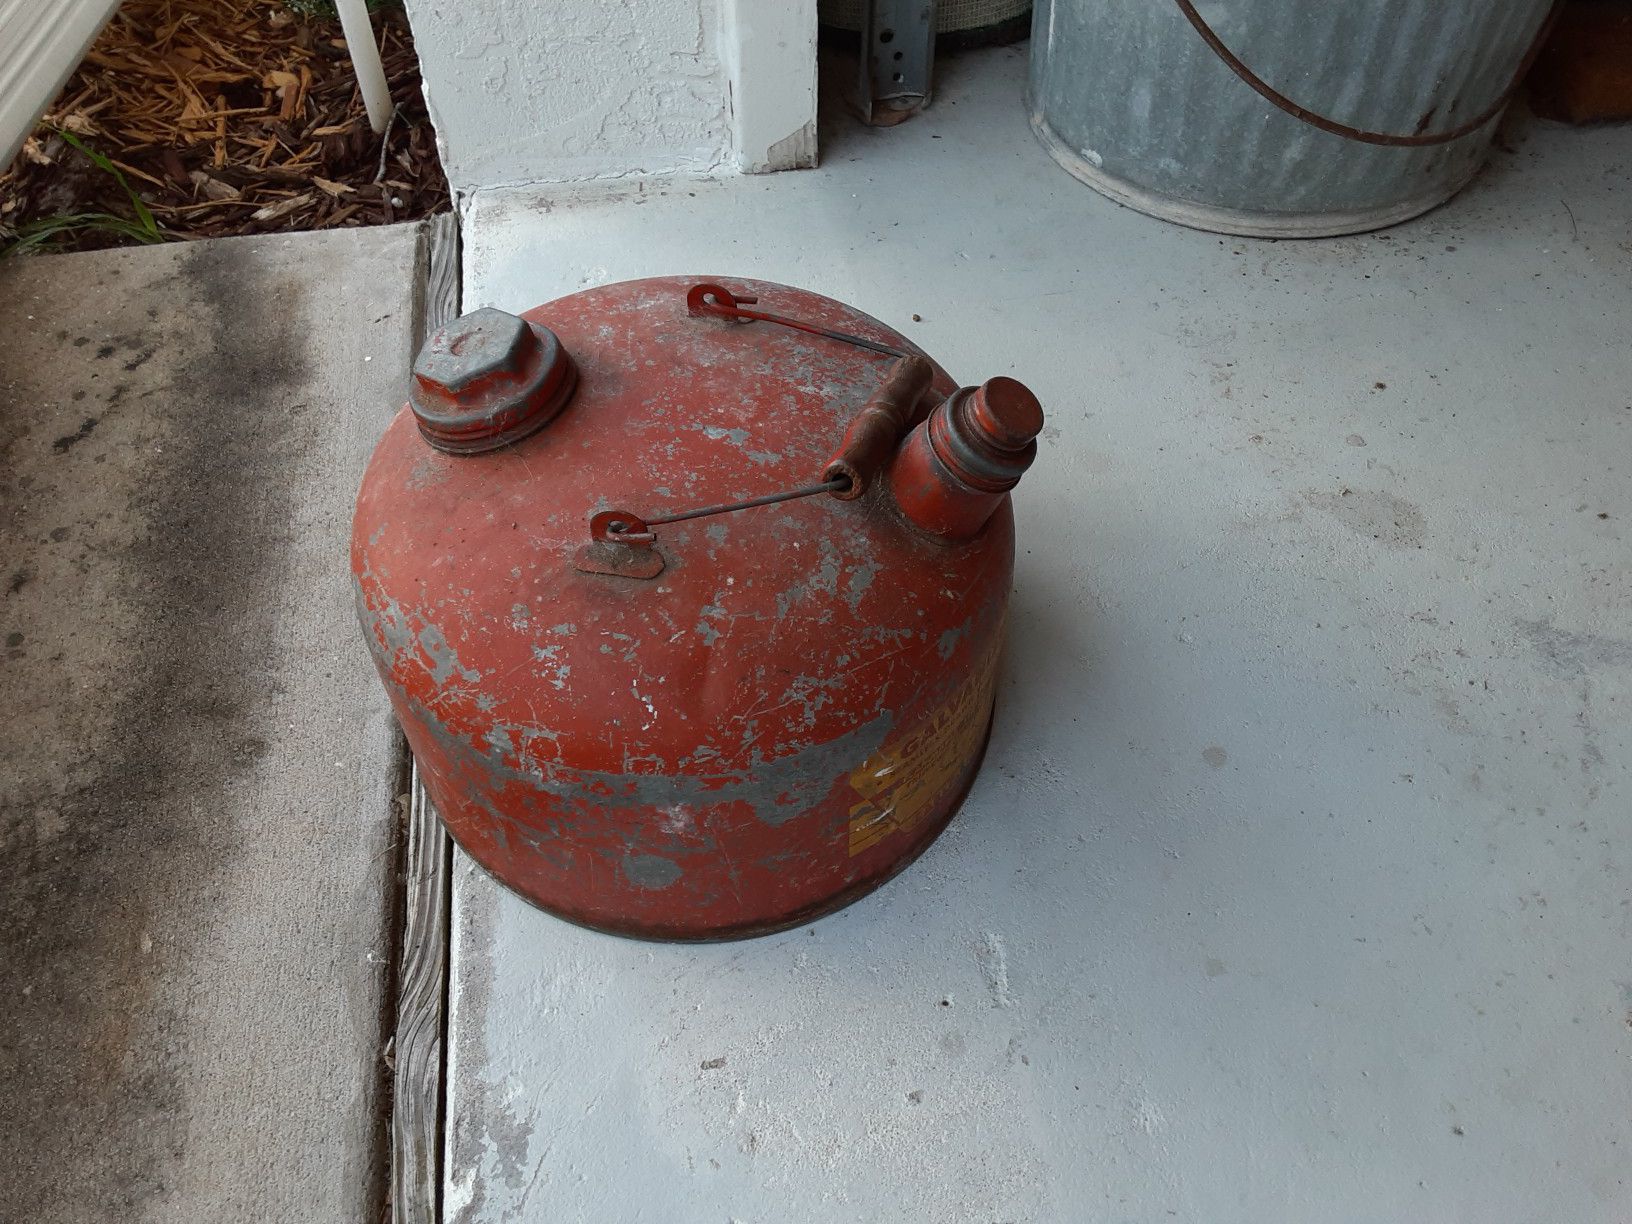 Antique gas can all metal no holes in the bottom or rust cap fits tightly